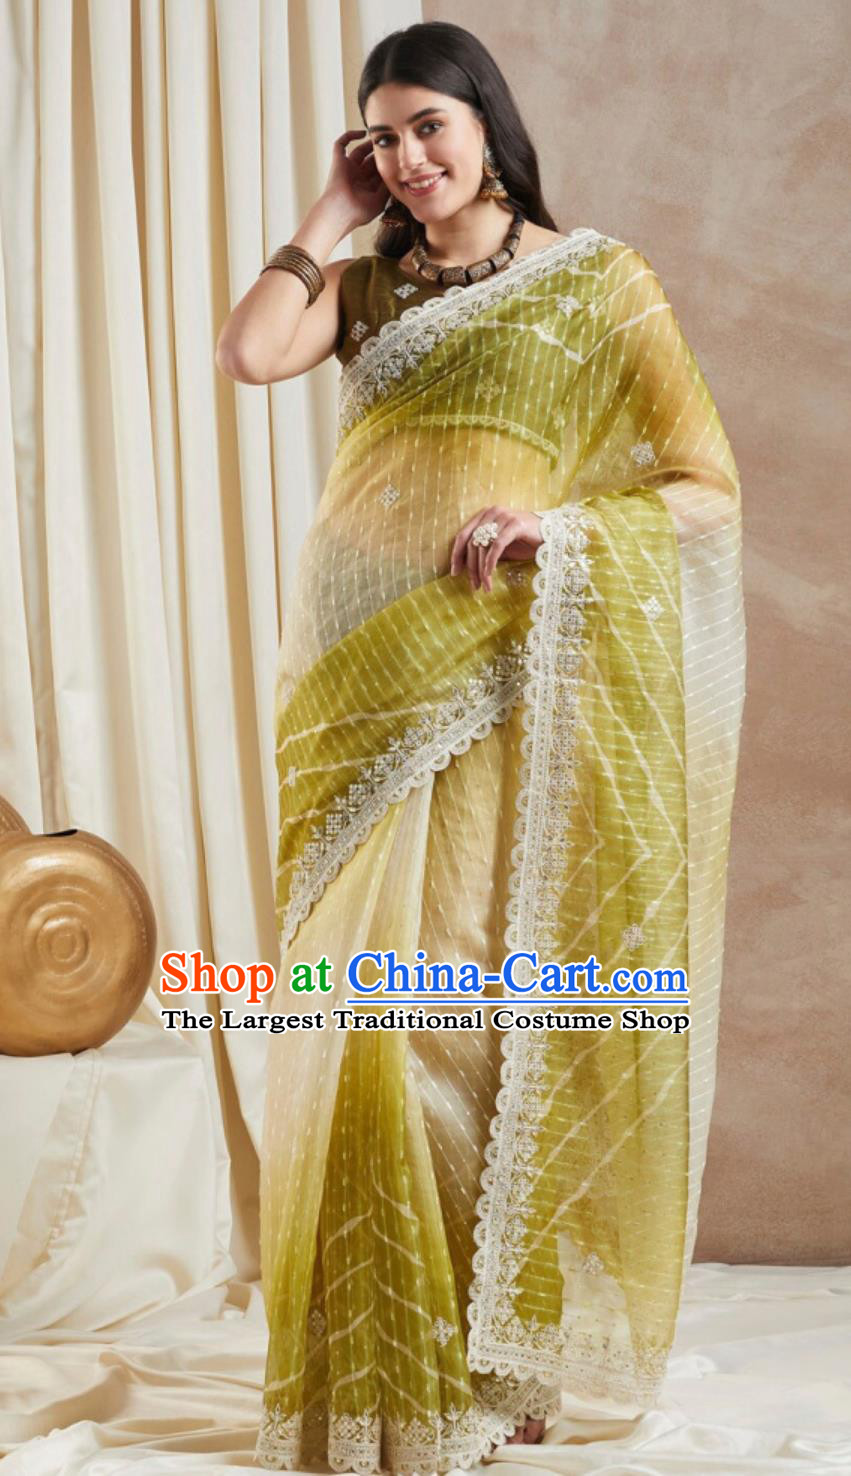 India Woman Embroidery Costume Indian National Clothing Traditional Festival Mustard Sari Dress